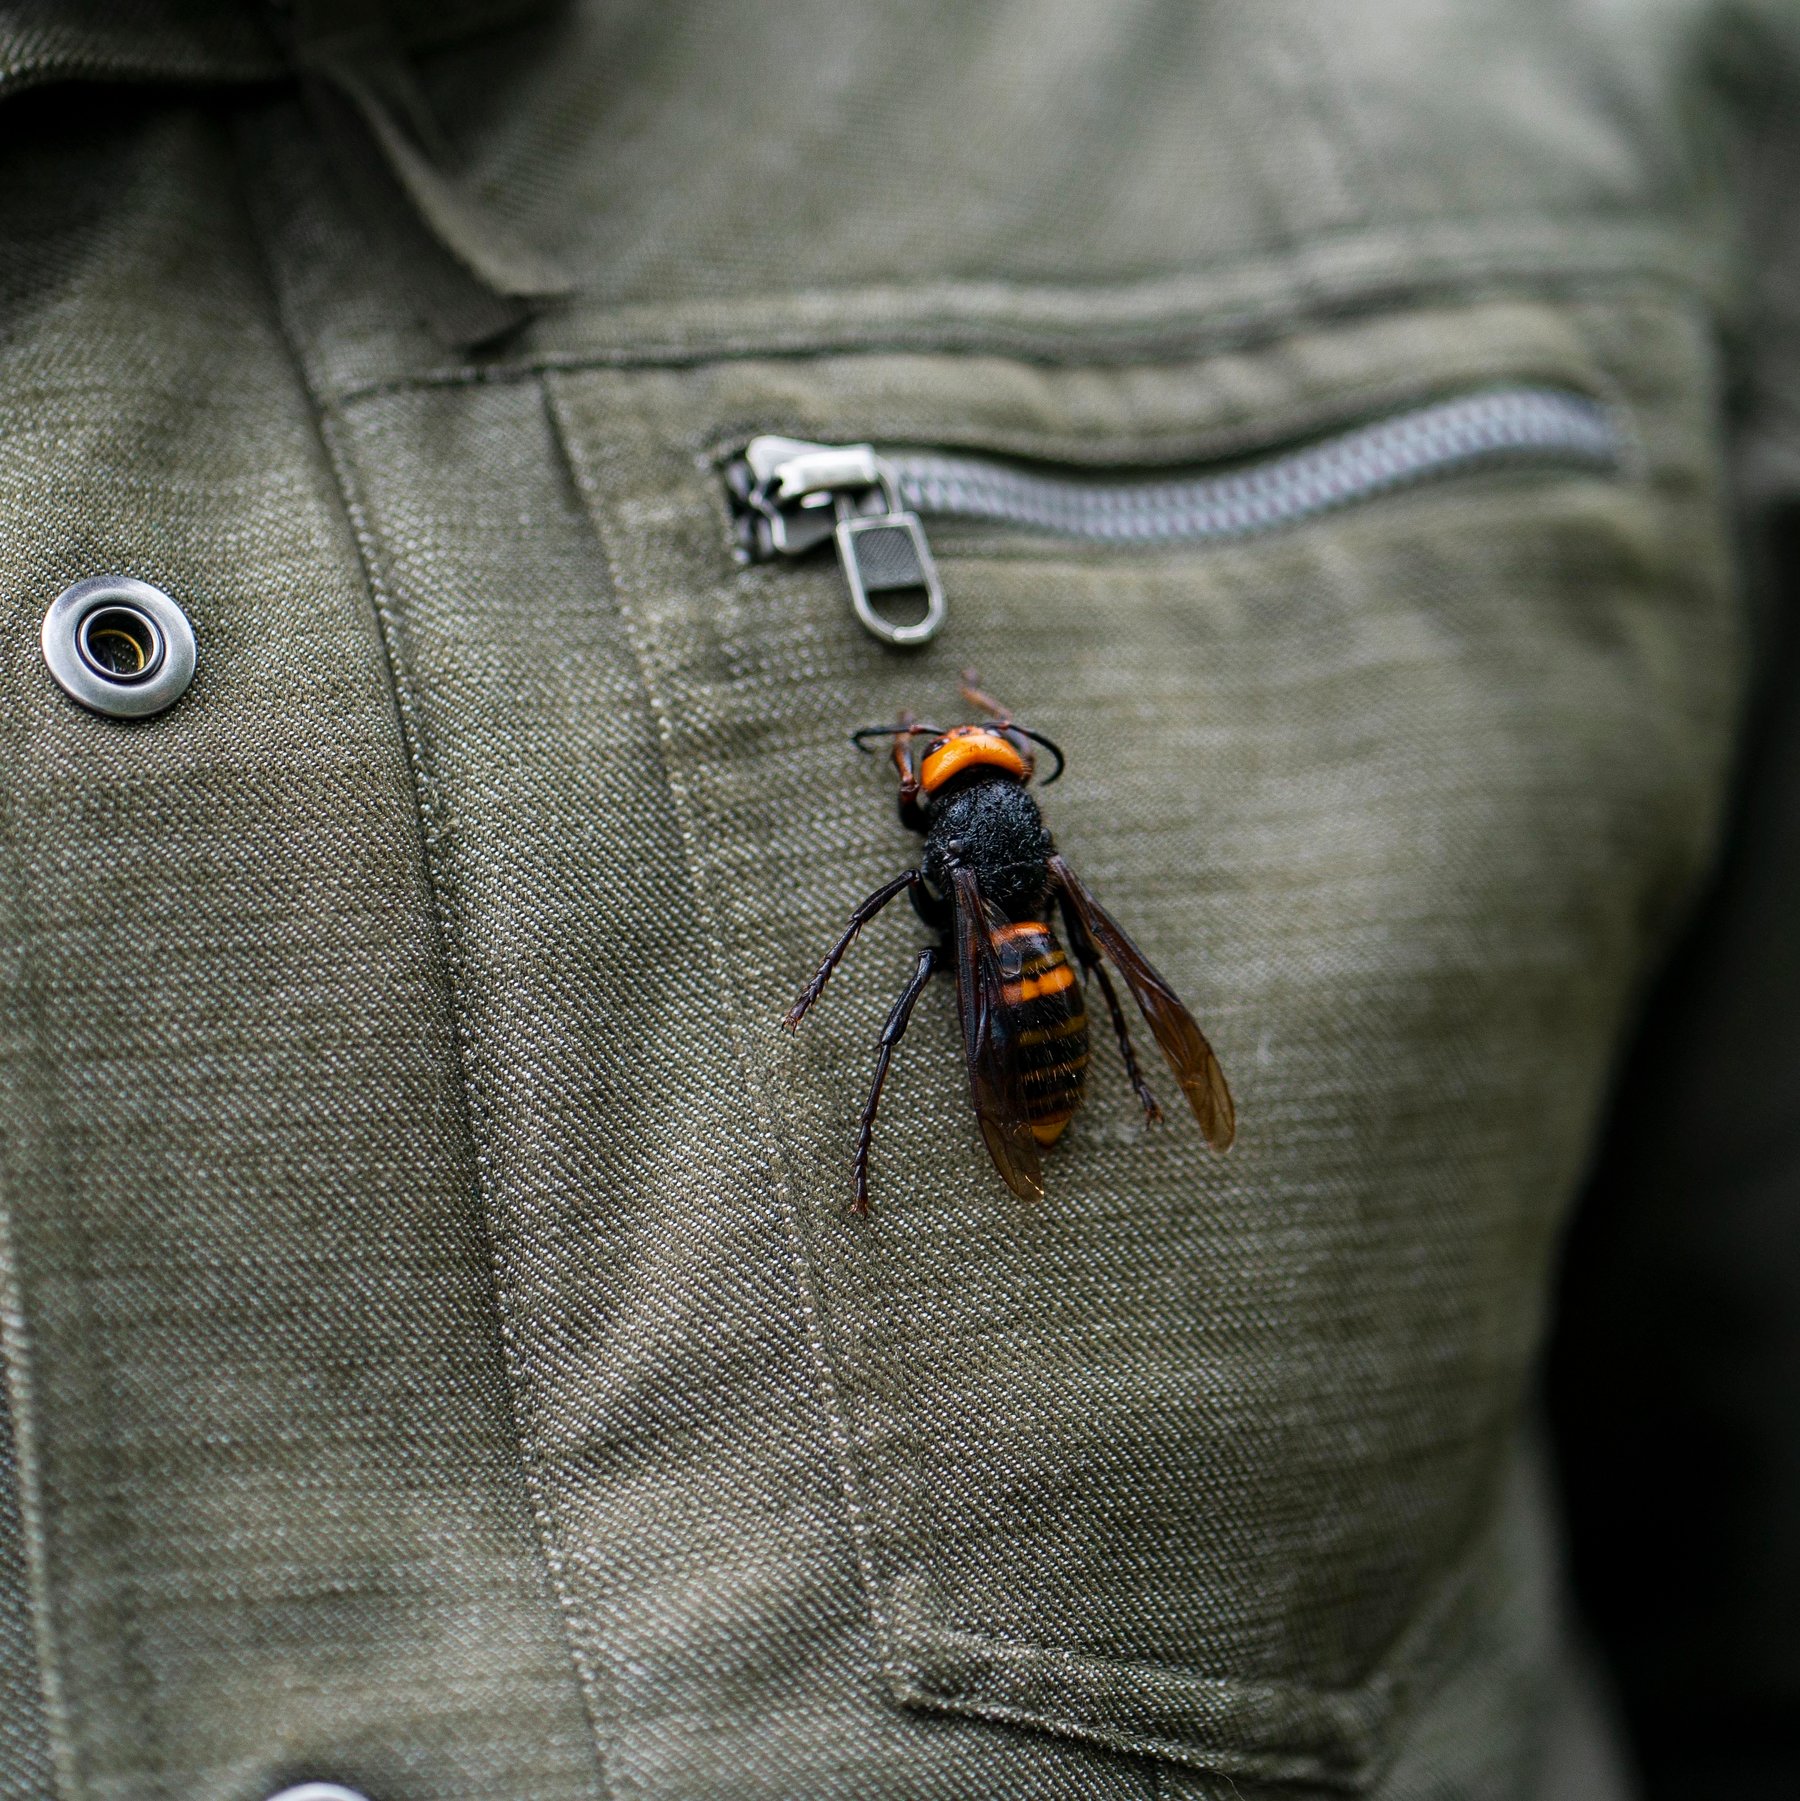 The Yellow-Legged Hornet Invasion: A Growing Threat to North American Ecosystems